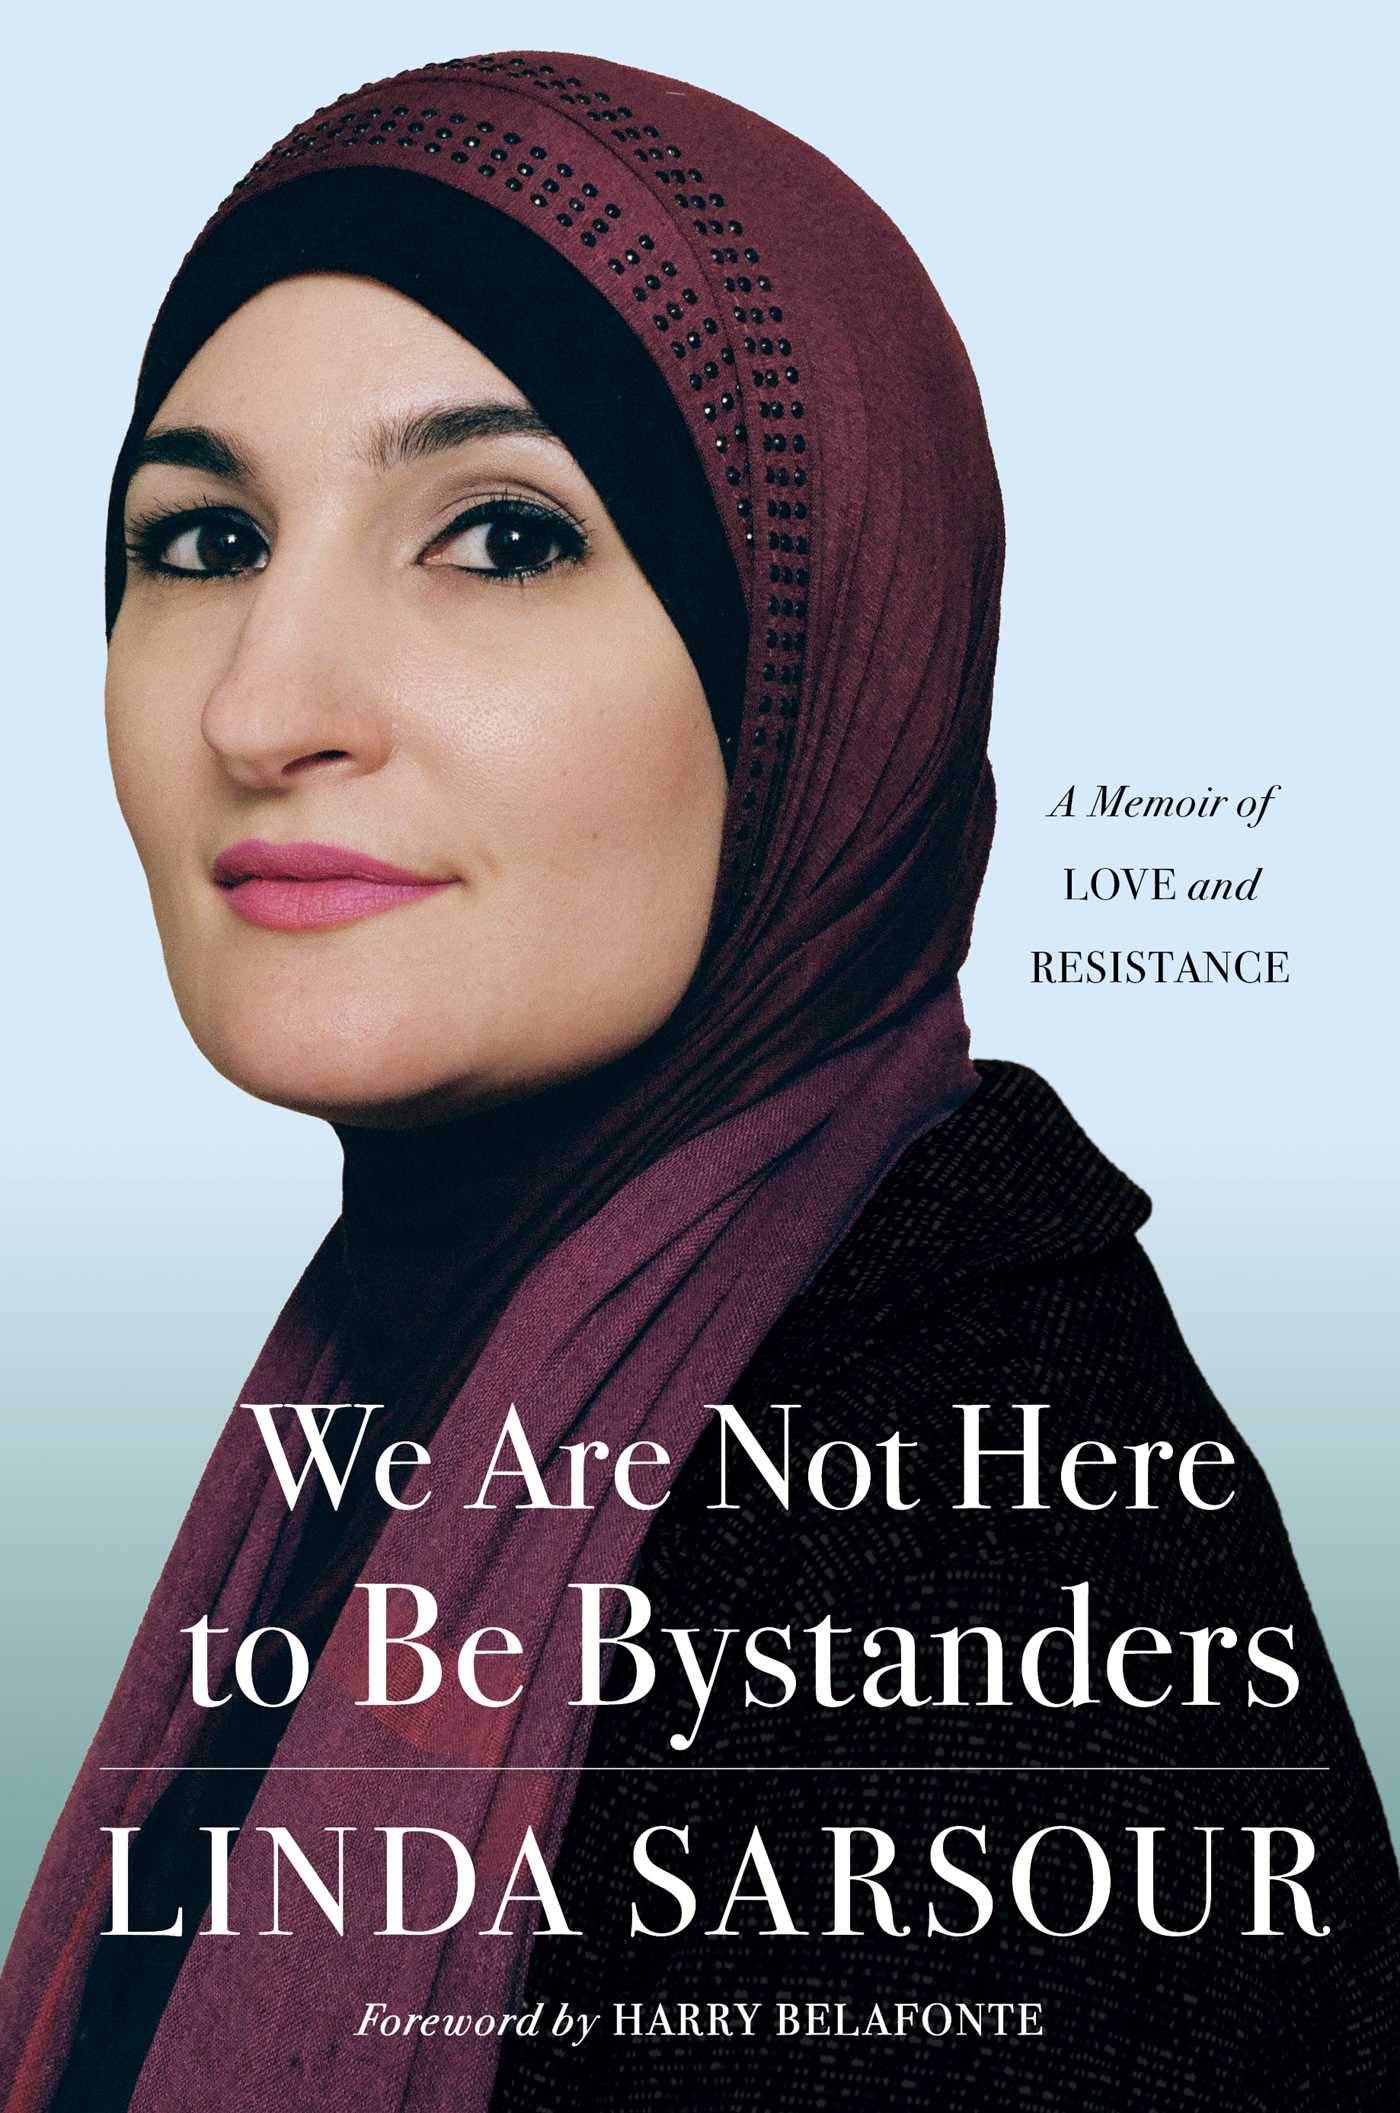 Book cover with photo of Linda Sarsour.